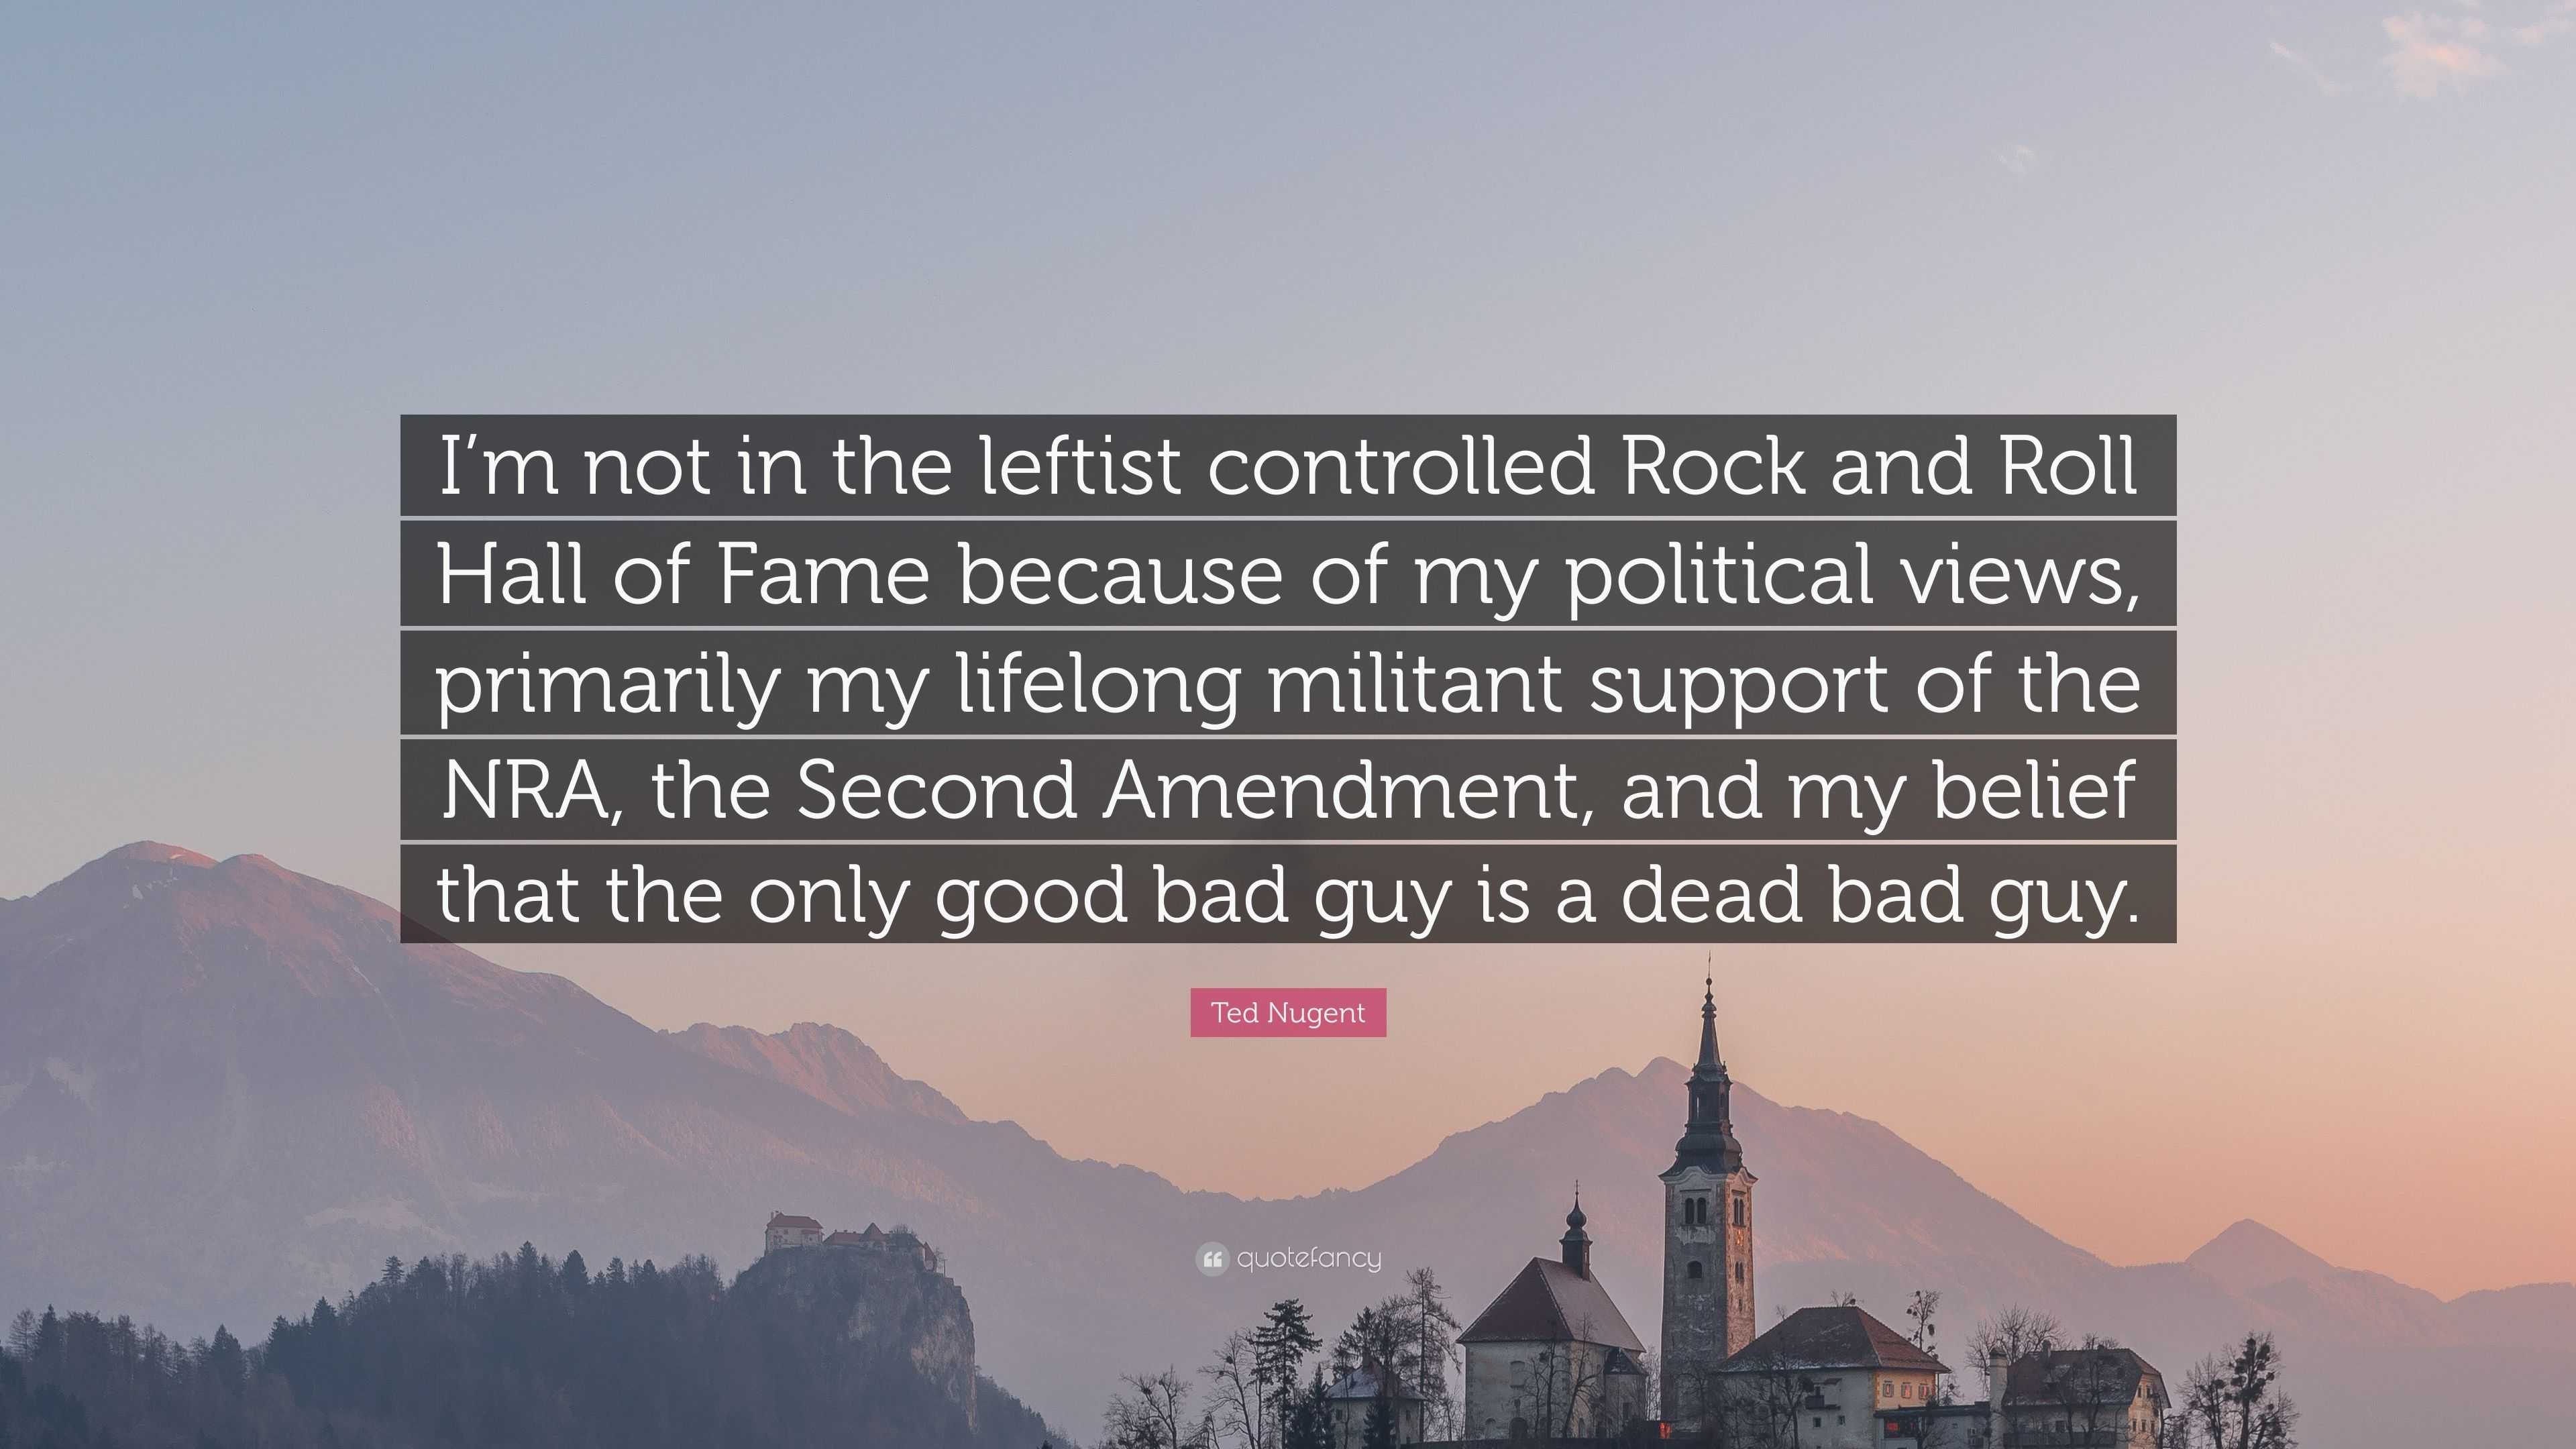 Ted Nugent Quote: “I’m not in the leftist controlled Rock and Roll Hall